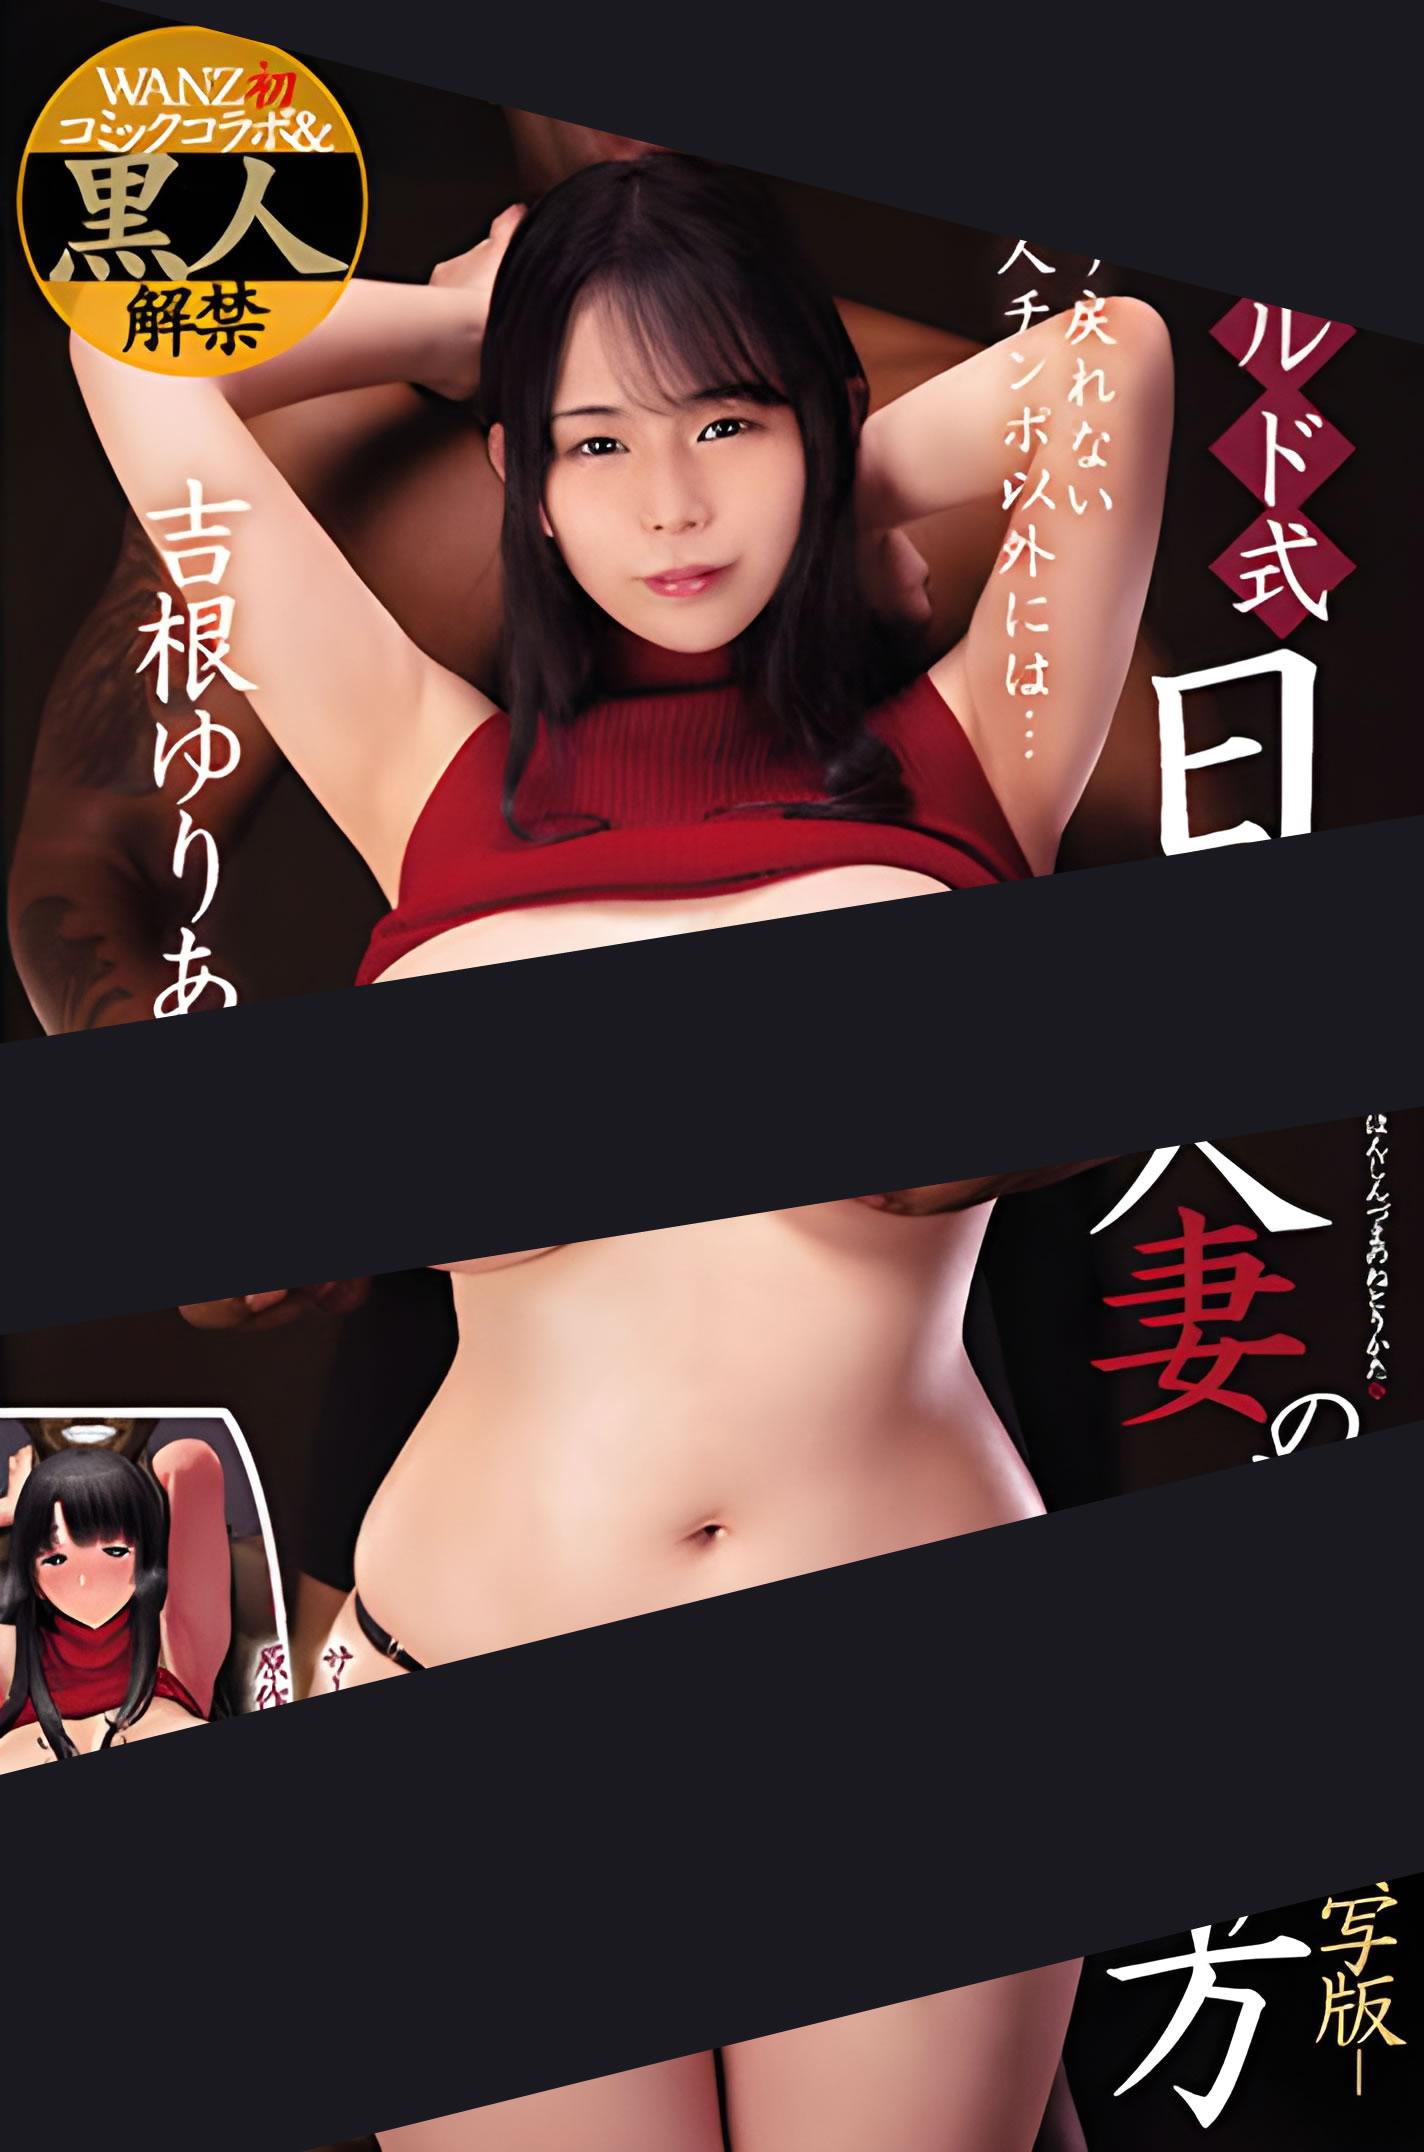 El hentai netorare How to Steal a Japanese Housewife consiguió un live-action